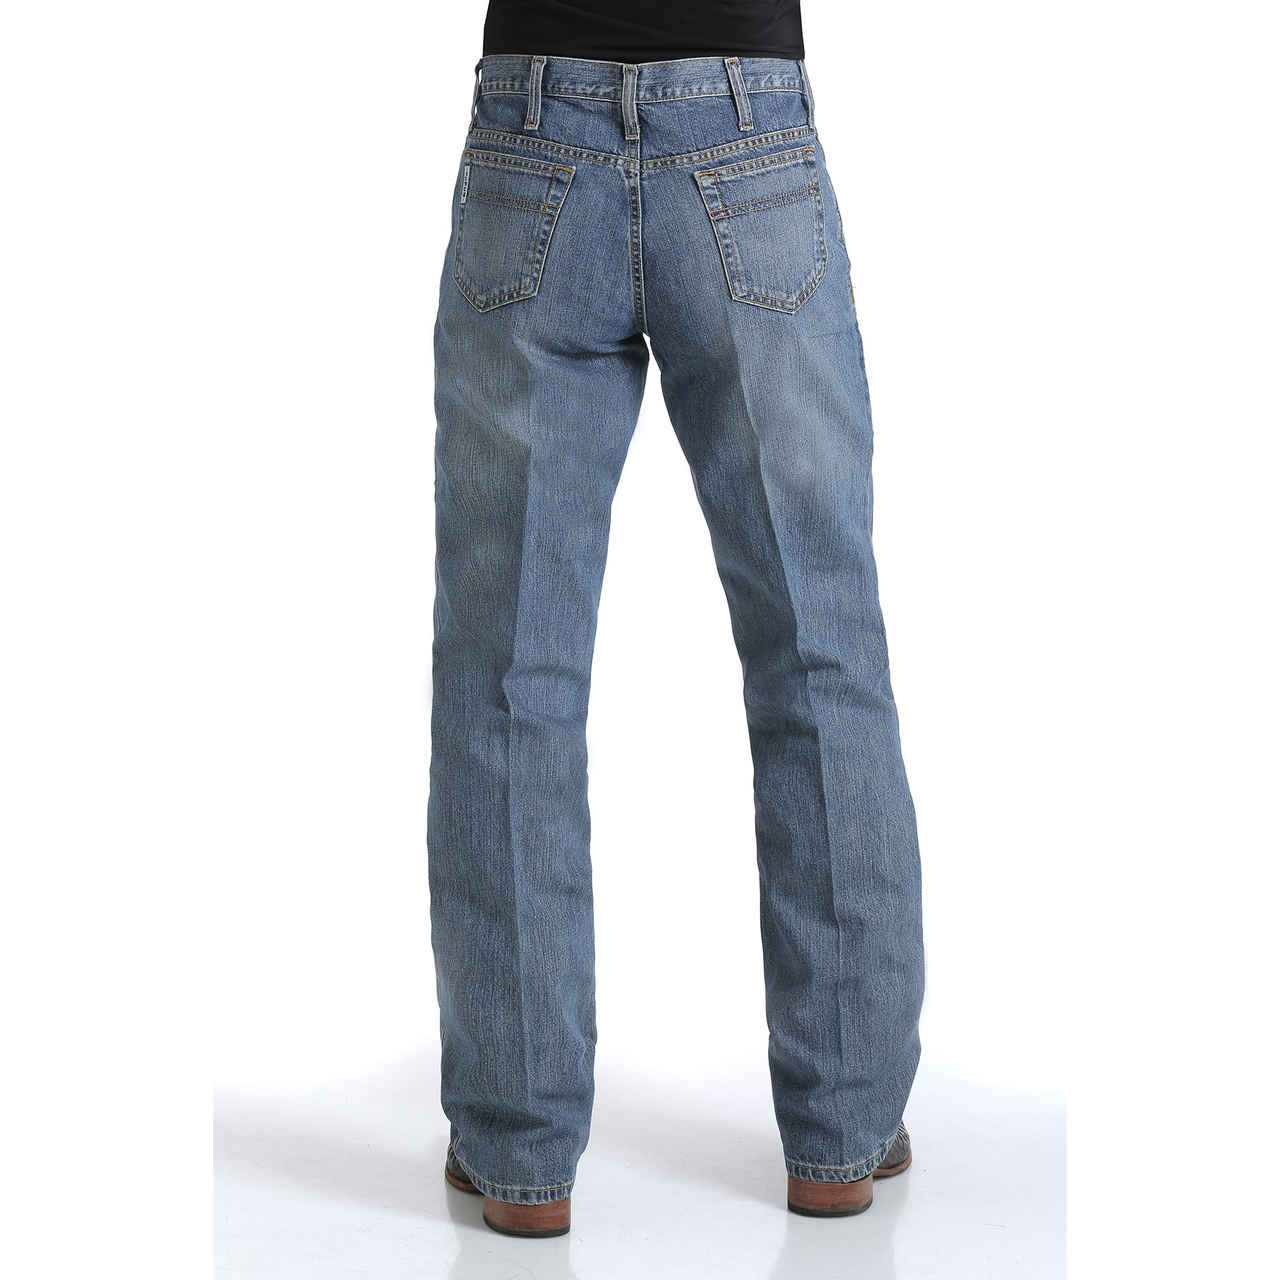 Cinch Men's Relaxed Fit White Label Performance Denim – Branded Country Wear